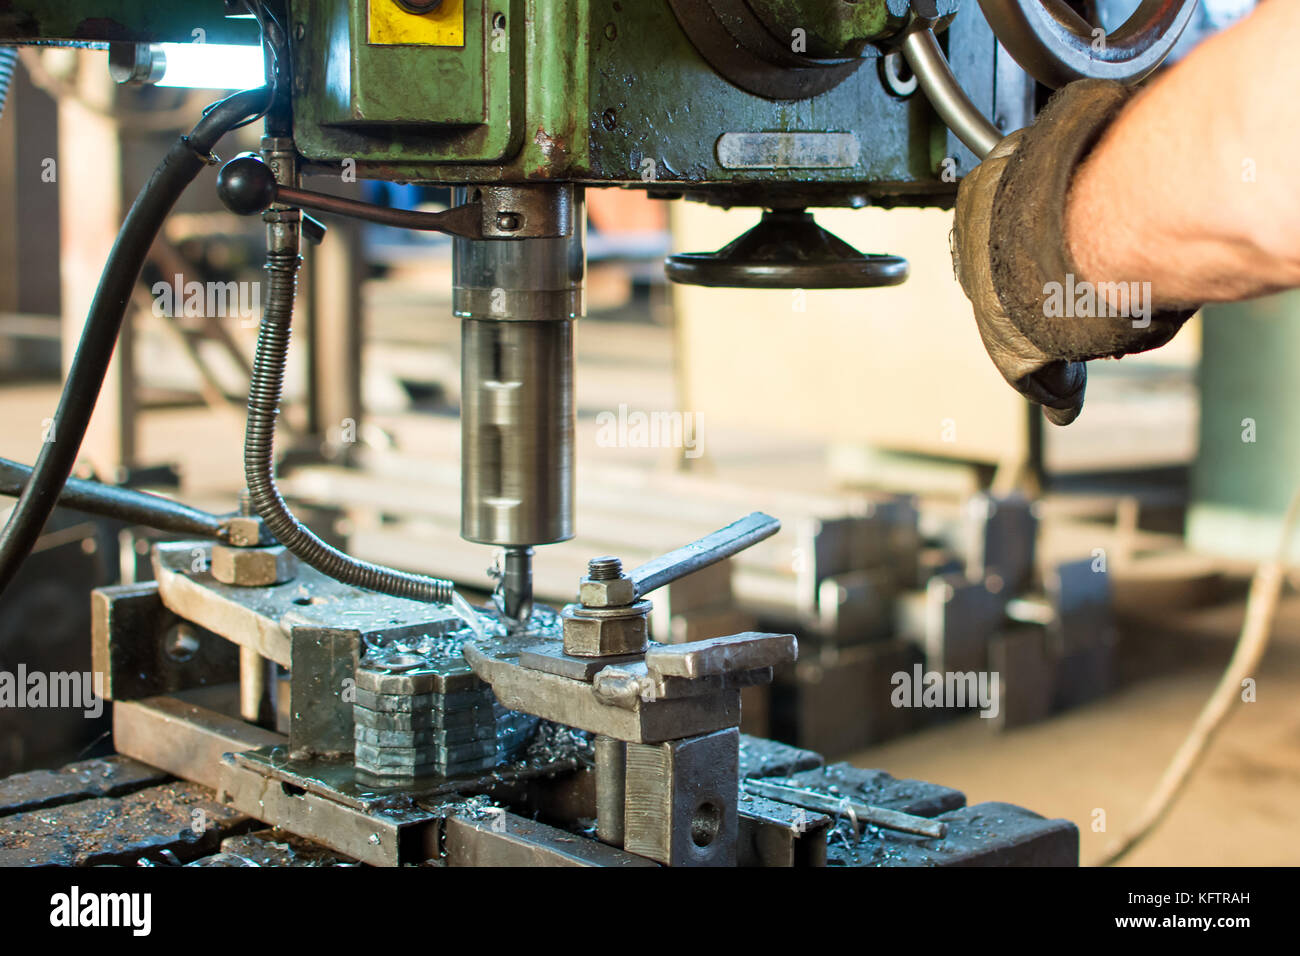 Worker operating stainless steel drilling machine cooled by water Stock Photo